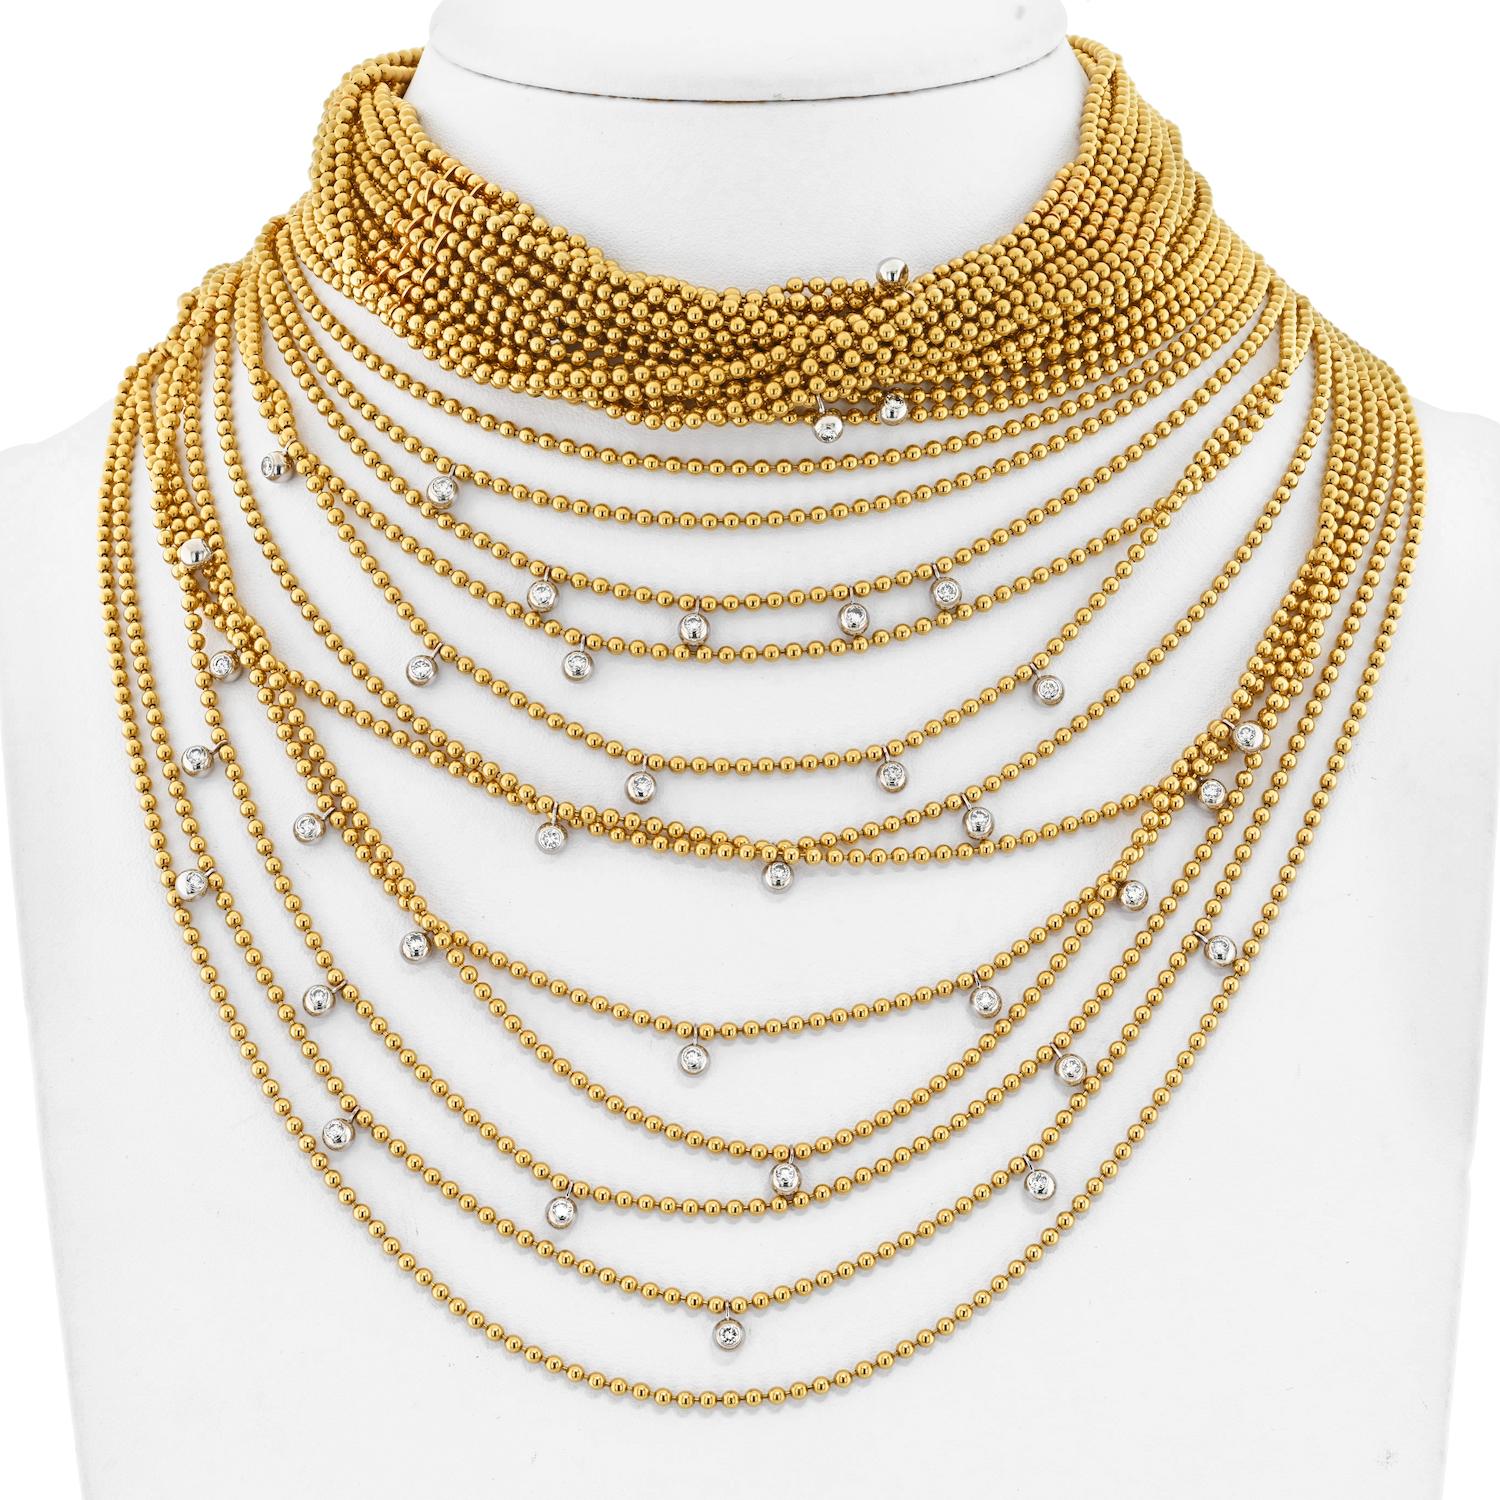 Cartier Draperie De Decollete 18K Yellow Gold Necklace of 34 Rows of Beads.

Just in time for the holidays this exclusive and rare Cartier Draperie De Decollete multi-strand diamond drops necklace.
Purchase this staple of a jewel before it's